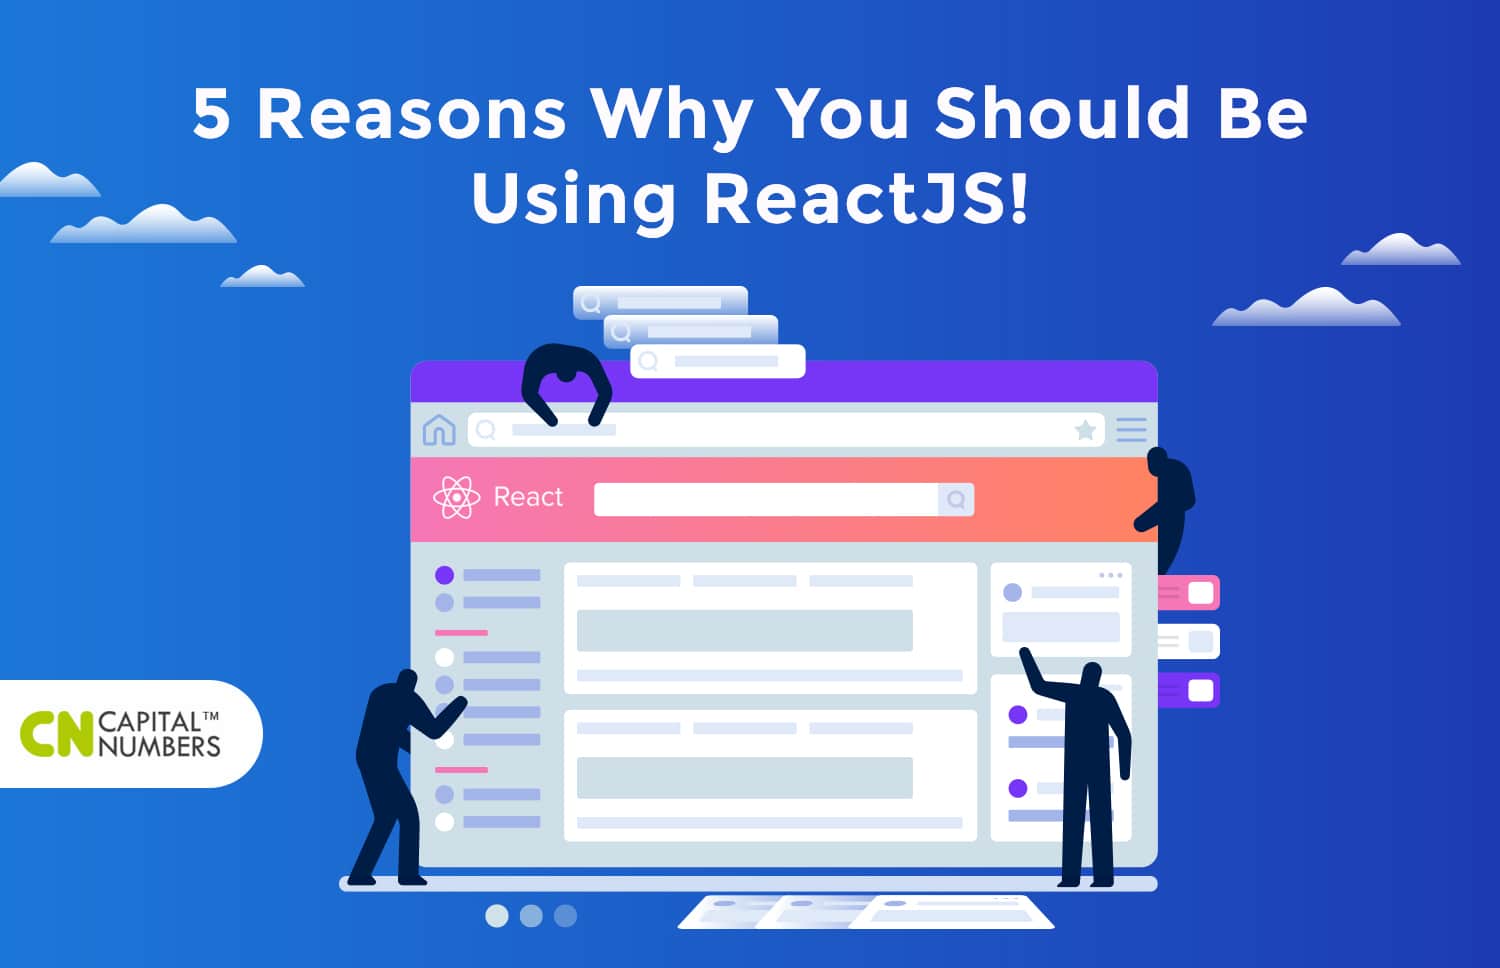 5 Reasons Why You Should Be Using ReactJS!